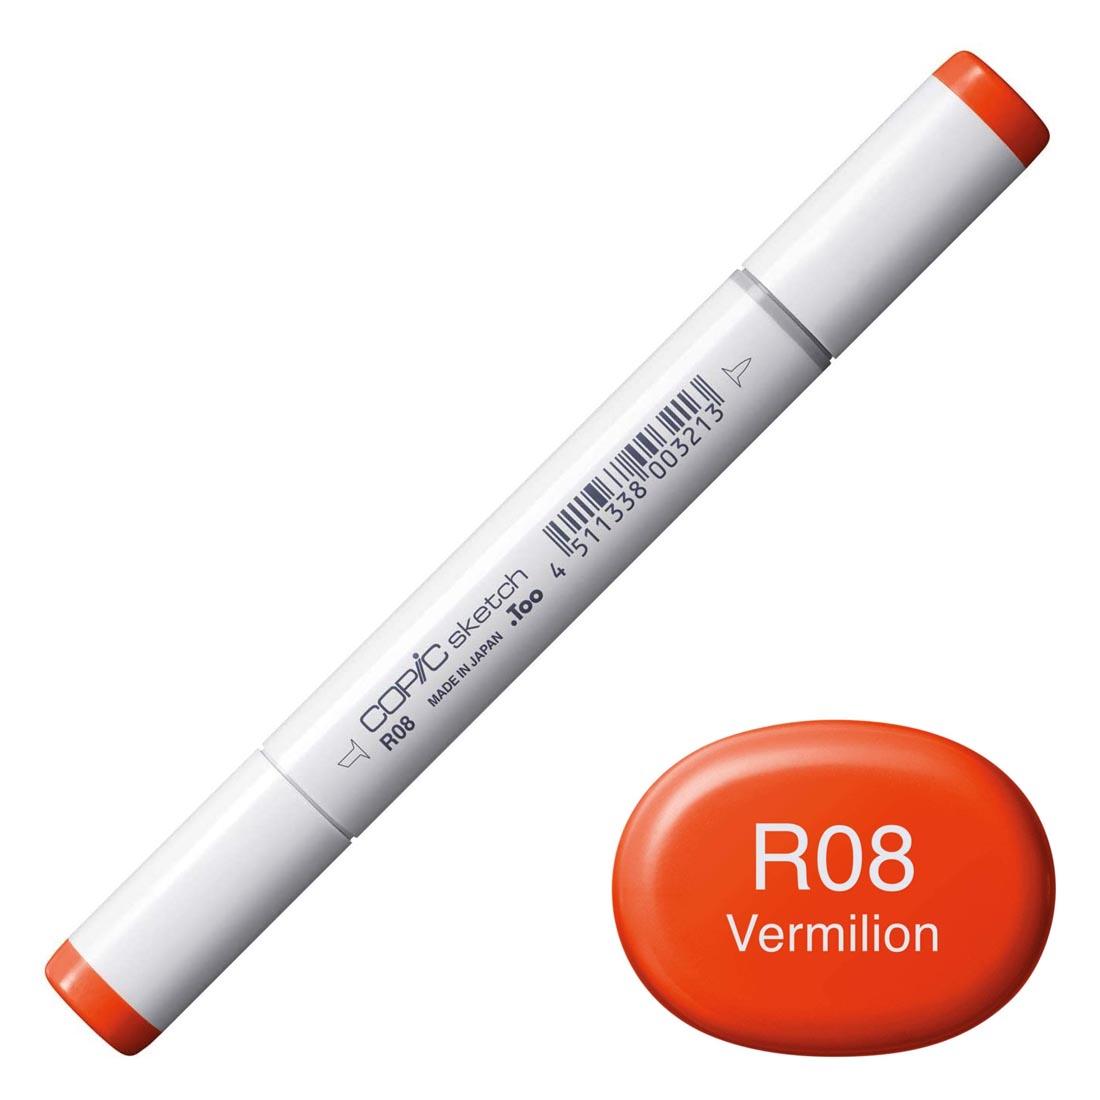 COPIC Sketch Marker with a color swatch and text of R08 Vermilion